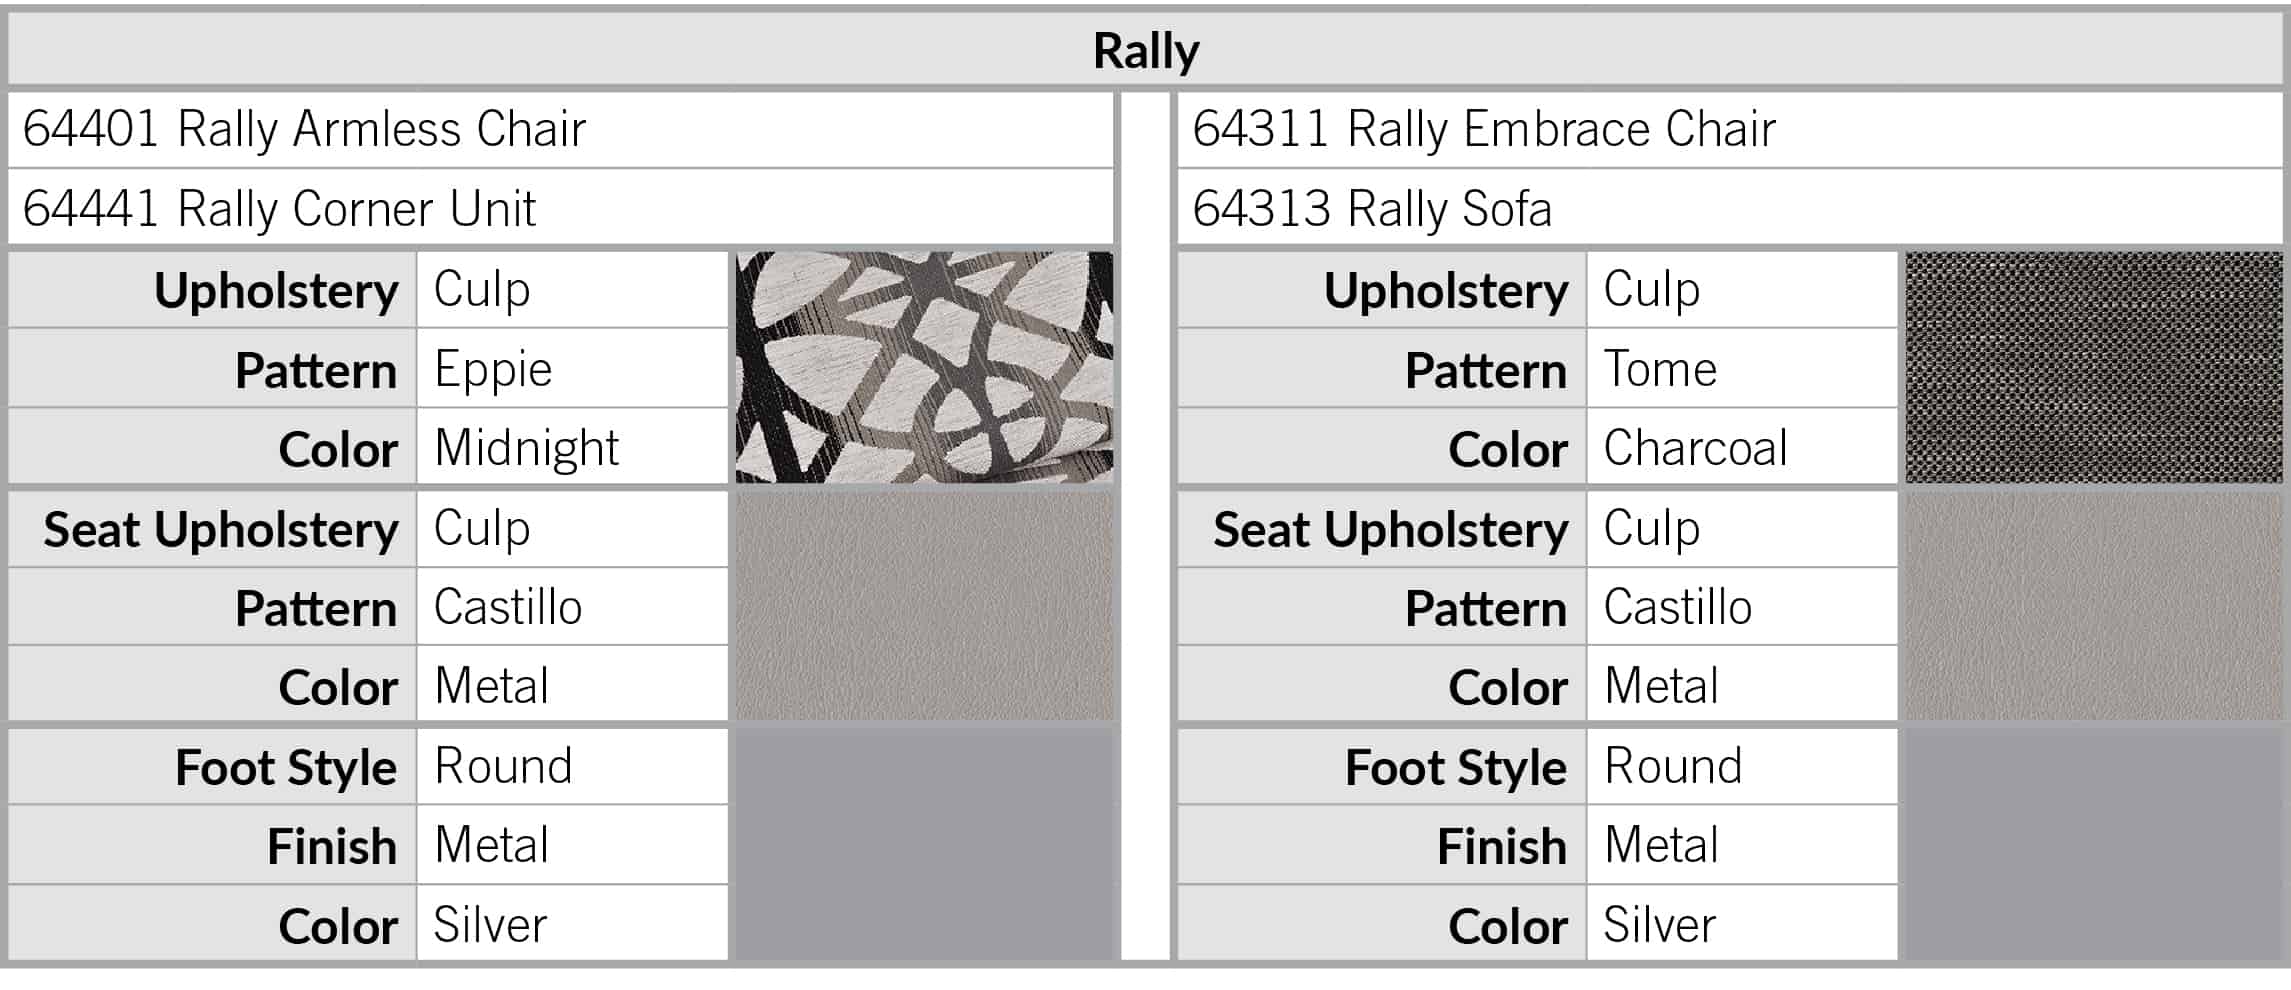 Furniture NOW Rally Details